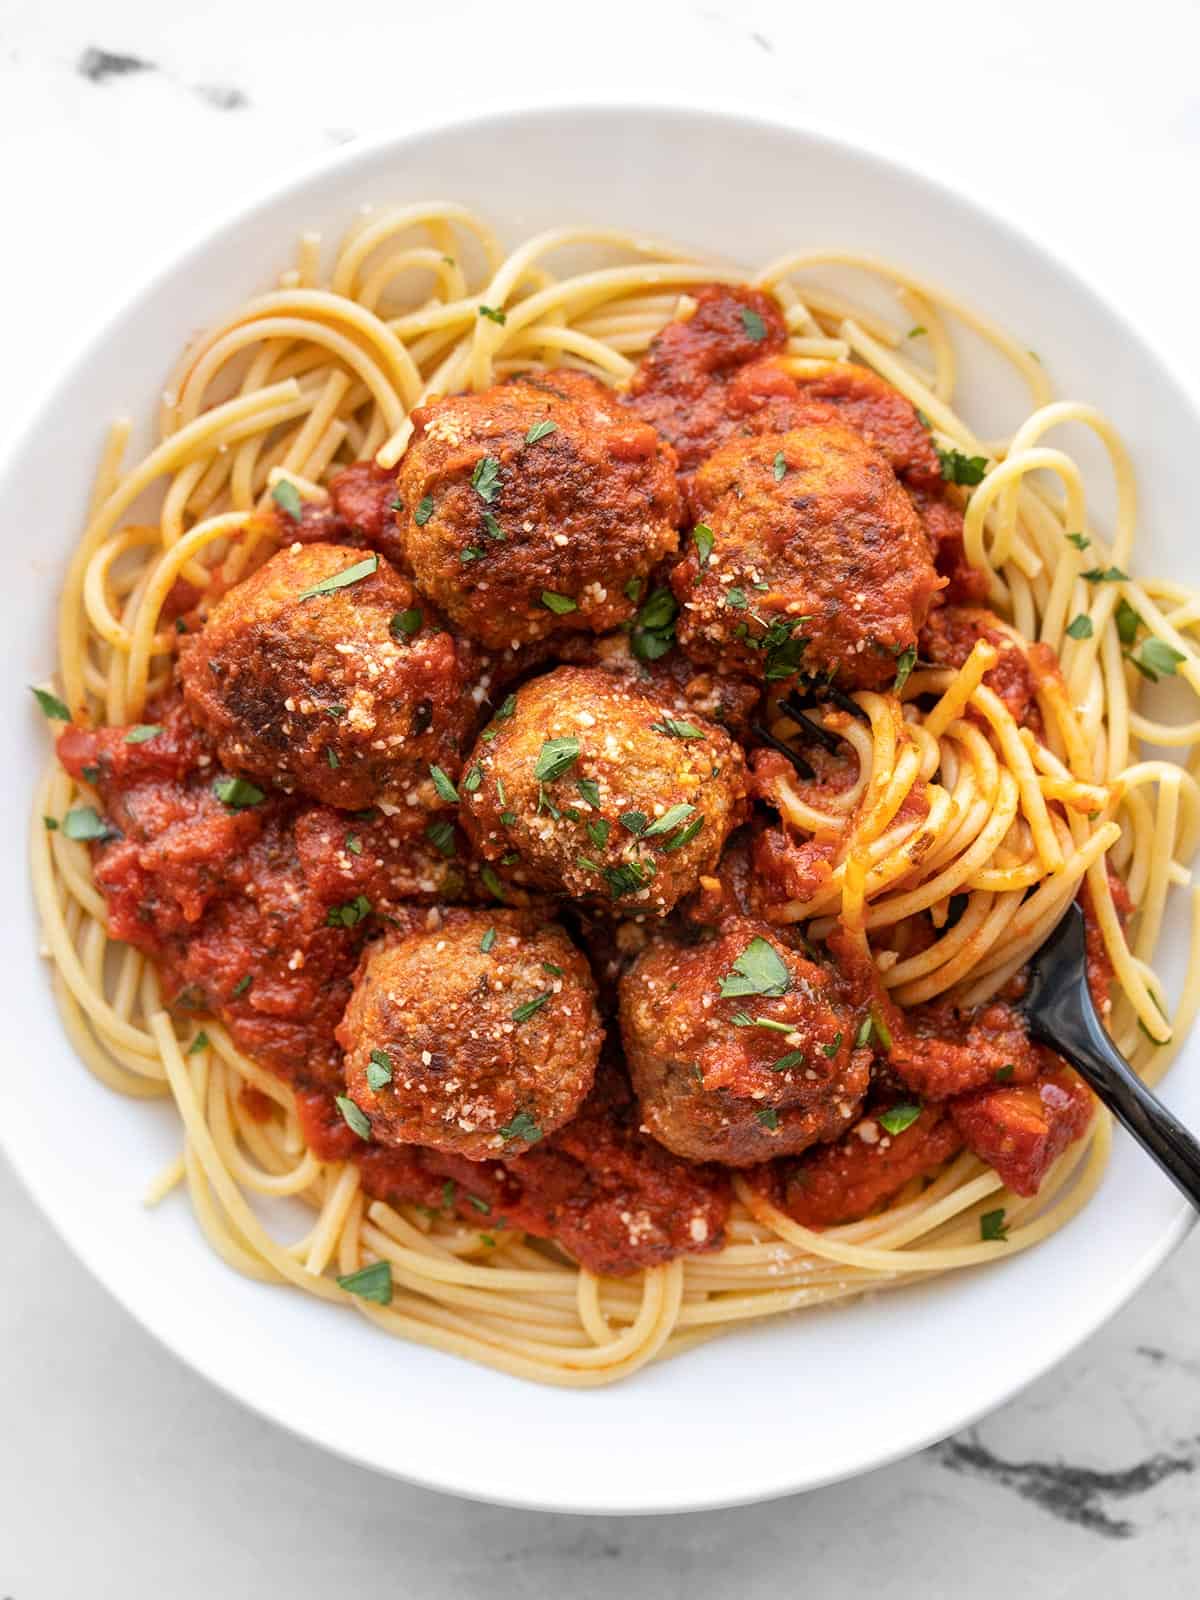 A plate full of spaghetti and meatballs with a fork twirling the pasta